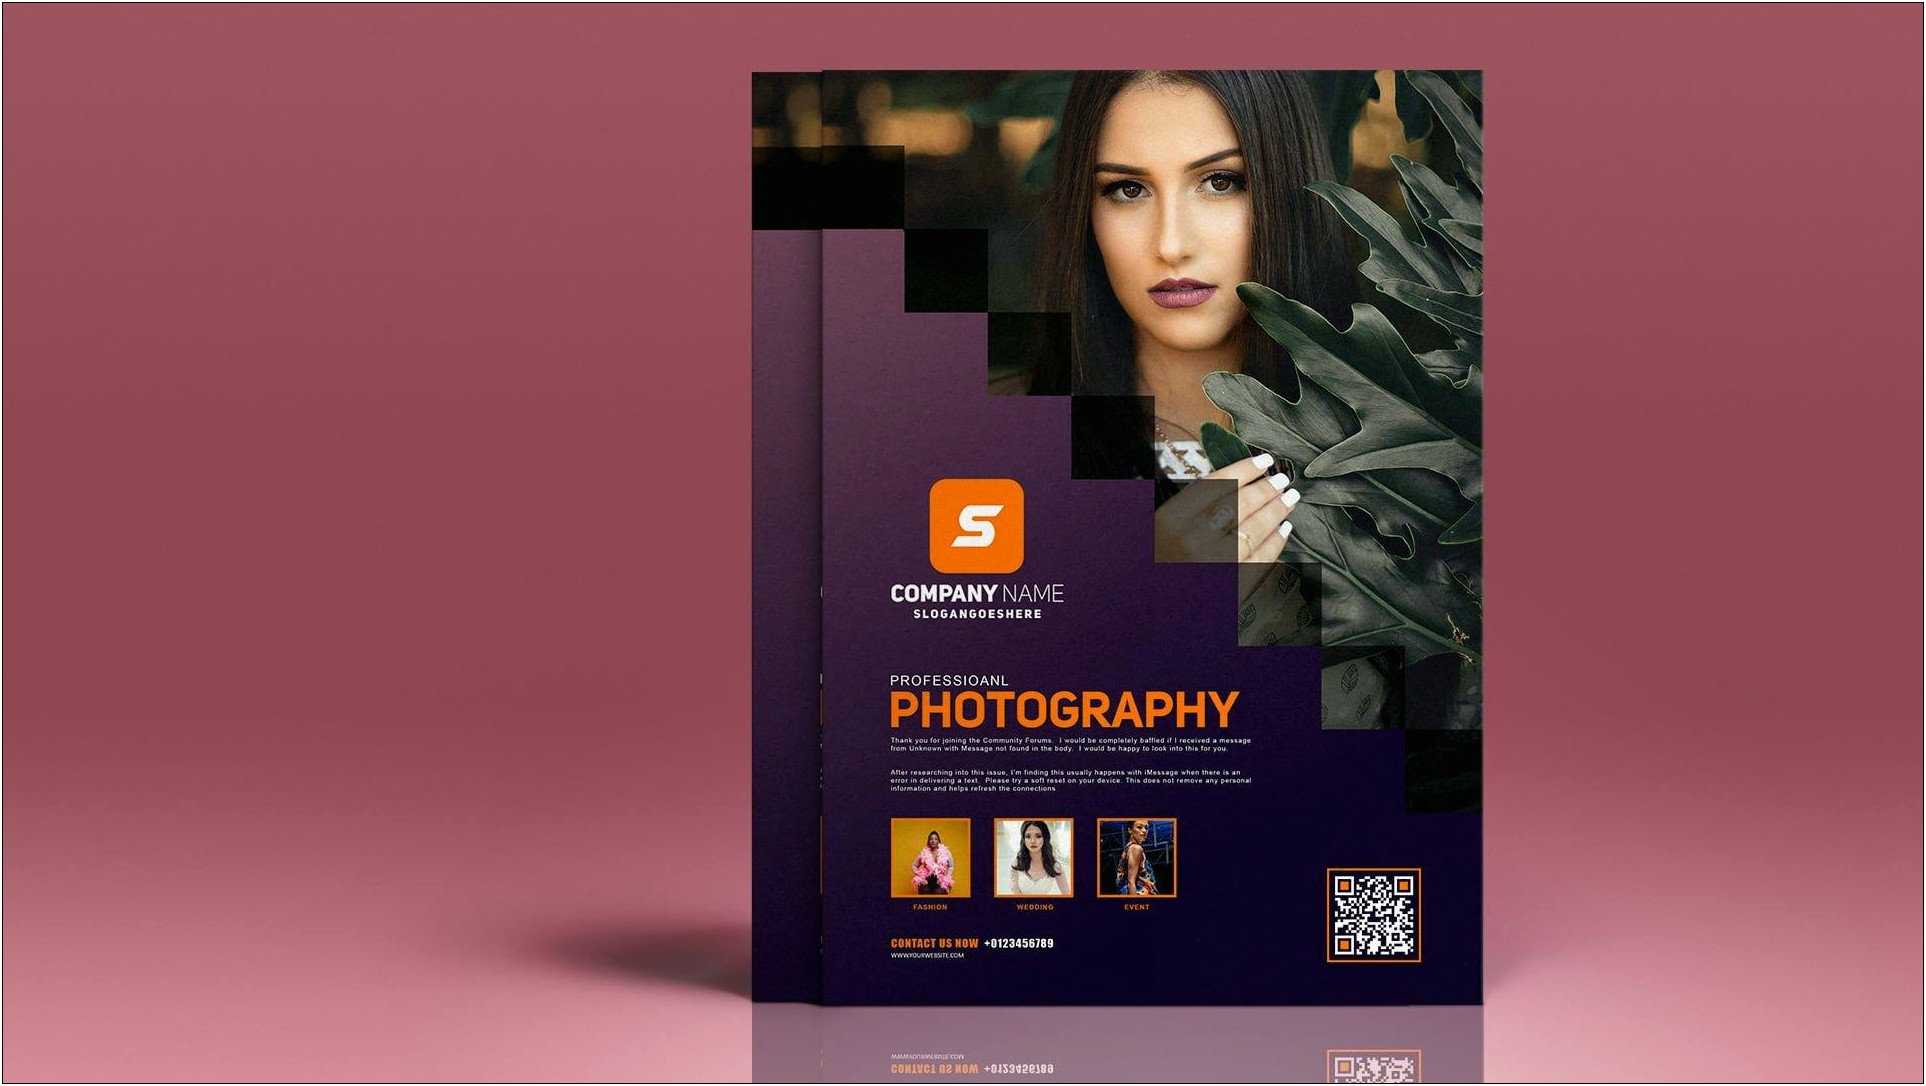 Template Poster Photoshop Psd Free Download